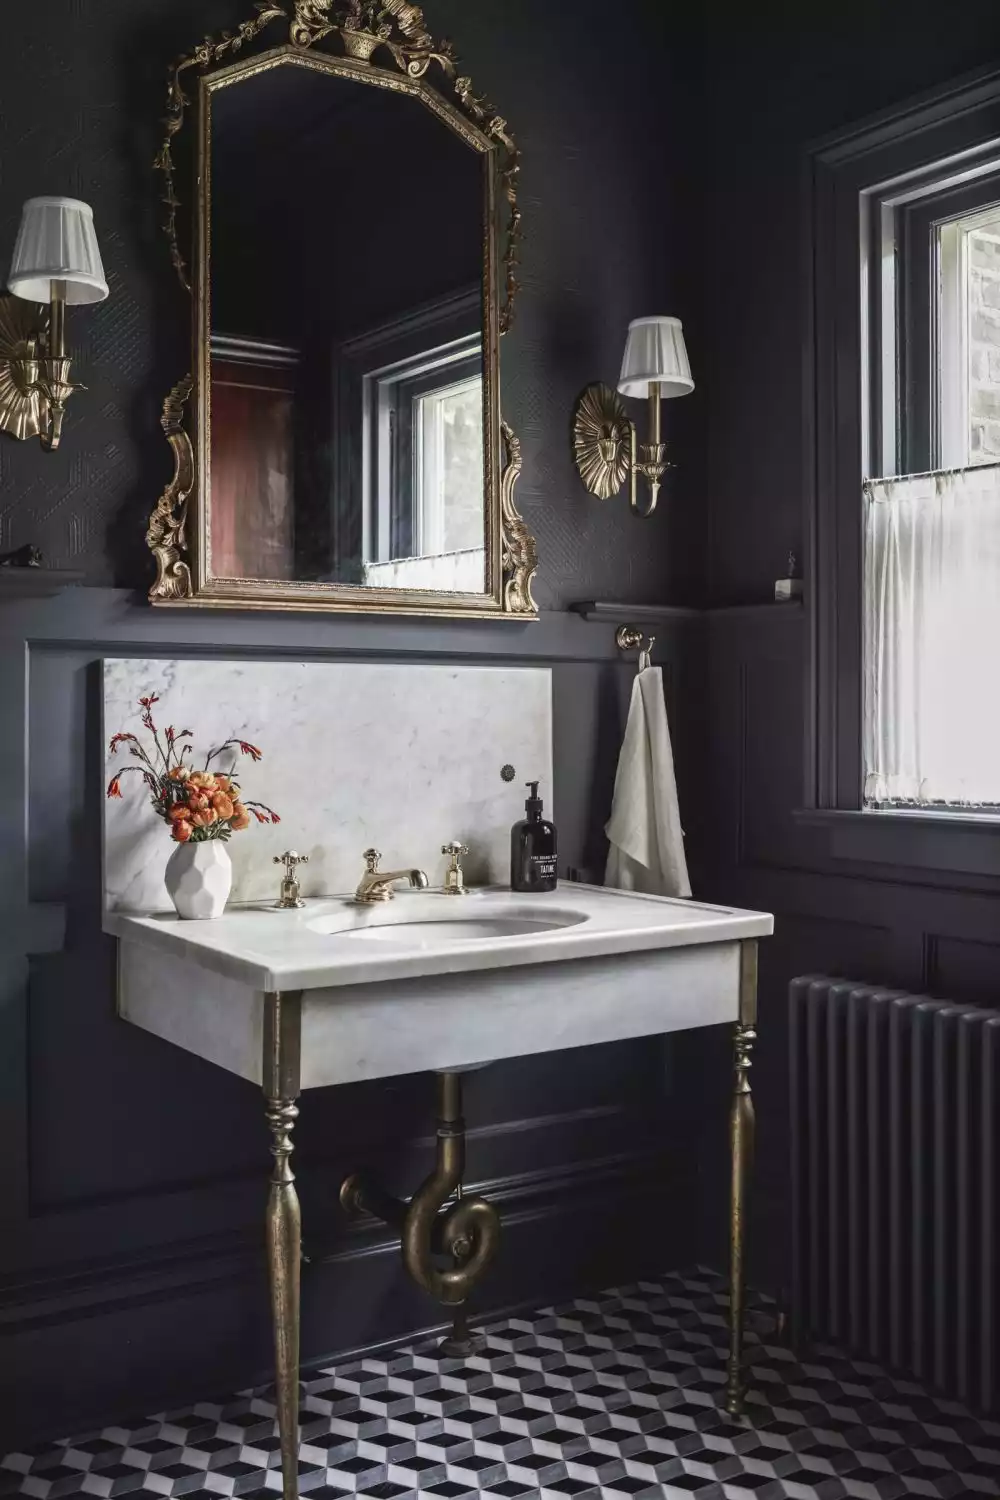 Beautiful bathroom with black and gold accents